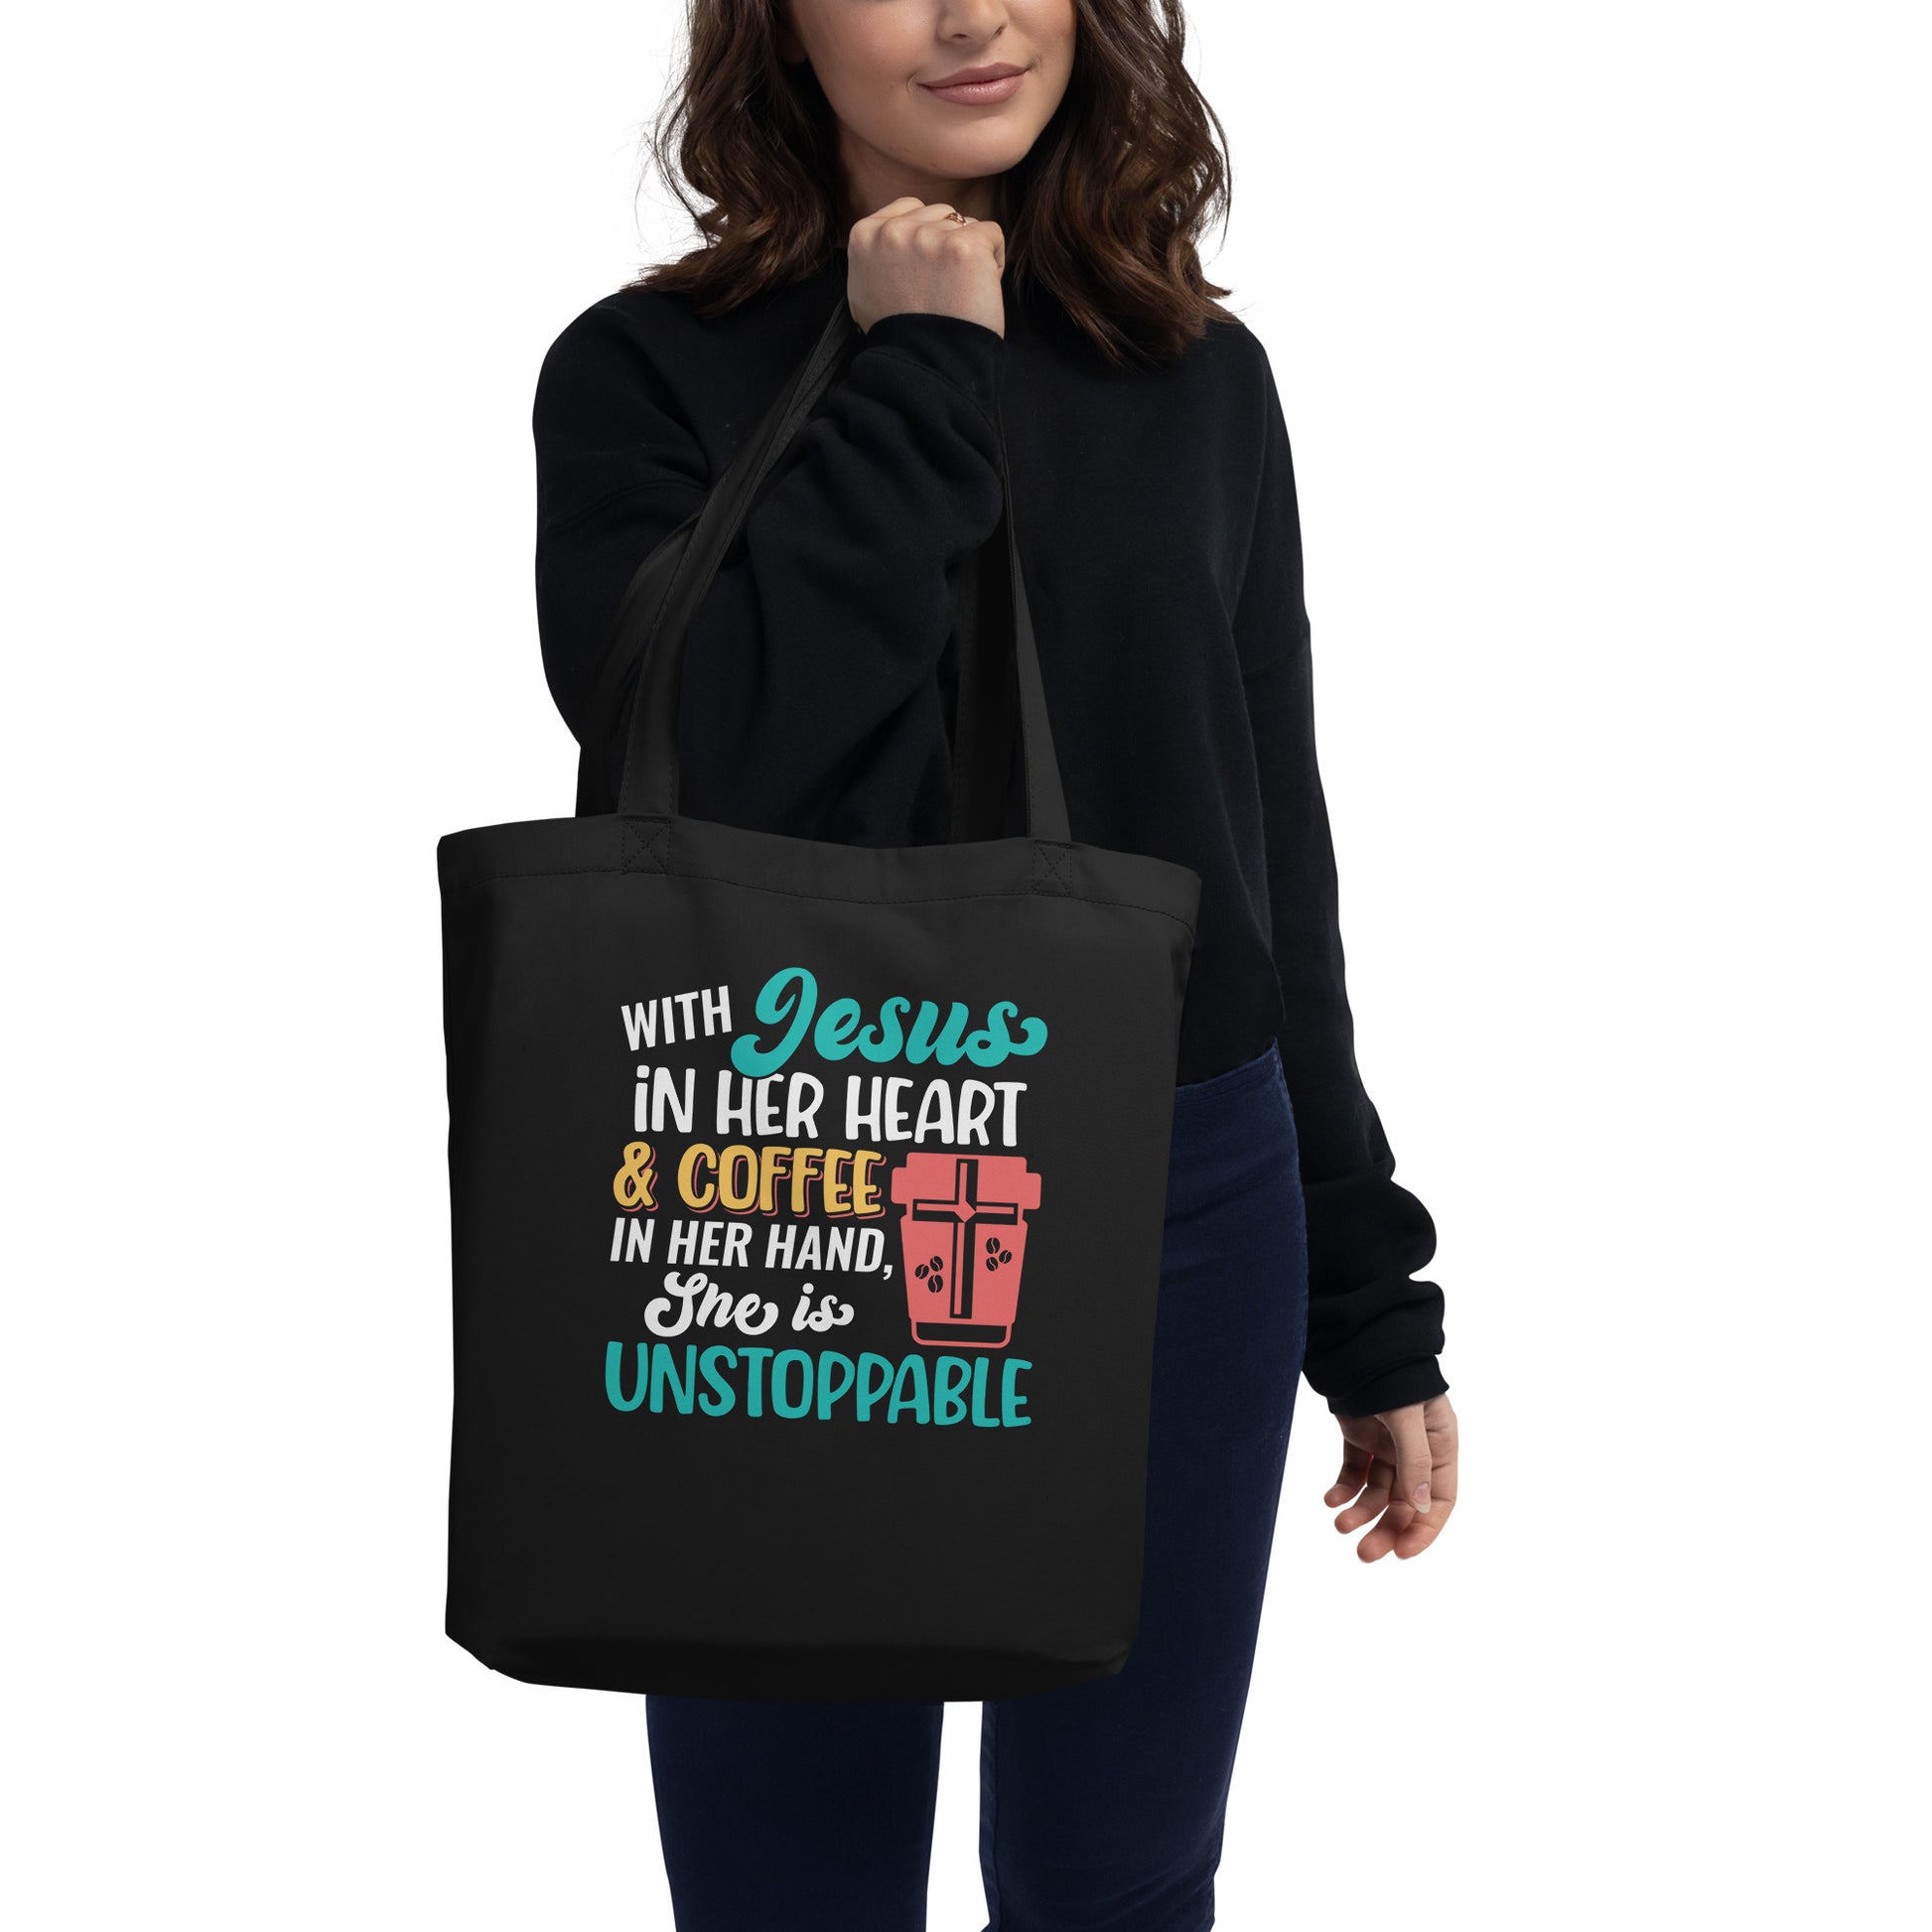 With Jesus in Her Heart & Coffee in Her Cup She is Unstoppable Eco Tote Bag